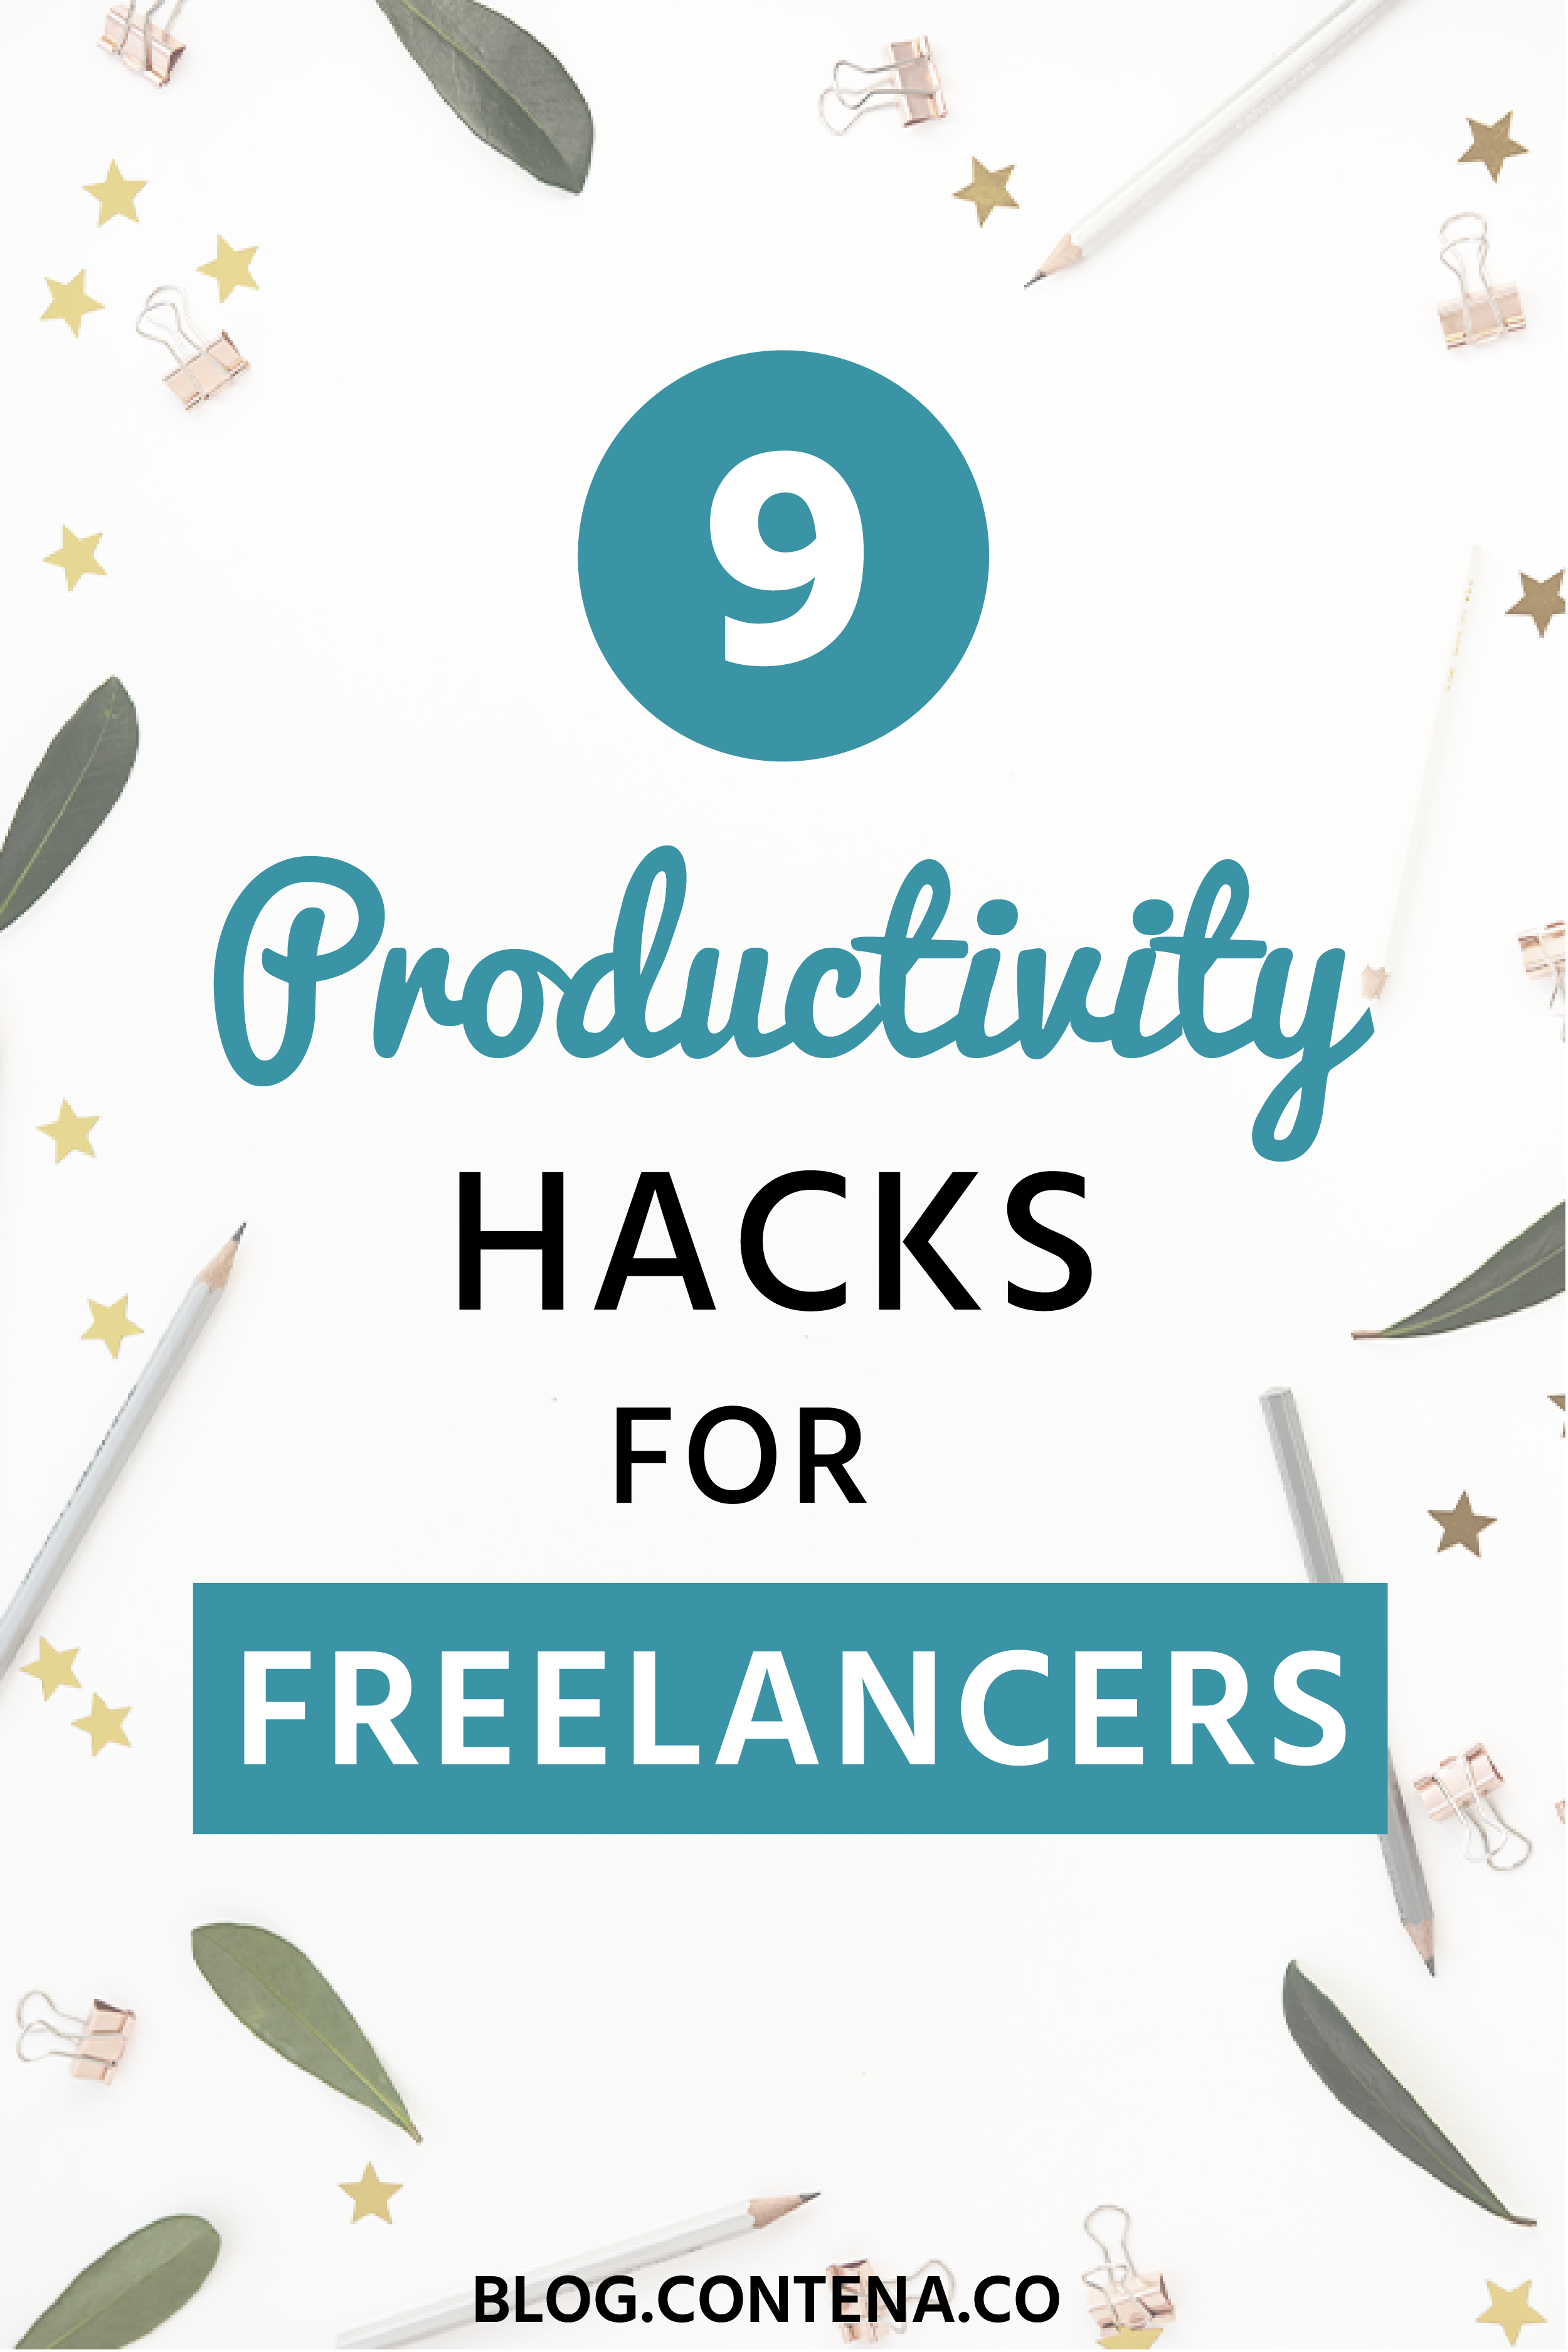 Check out these 9 productivity hacks for freelance writers. Boost your productivity and make more money with these unique productivity tips like dealing with distractions, and ways to improve how you write. #Productivity #FreelanceWriting #Freelancer #WorkFromHome #SideHustle #Money #OnlineBusiness #Writing #WritingJobs #Money